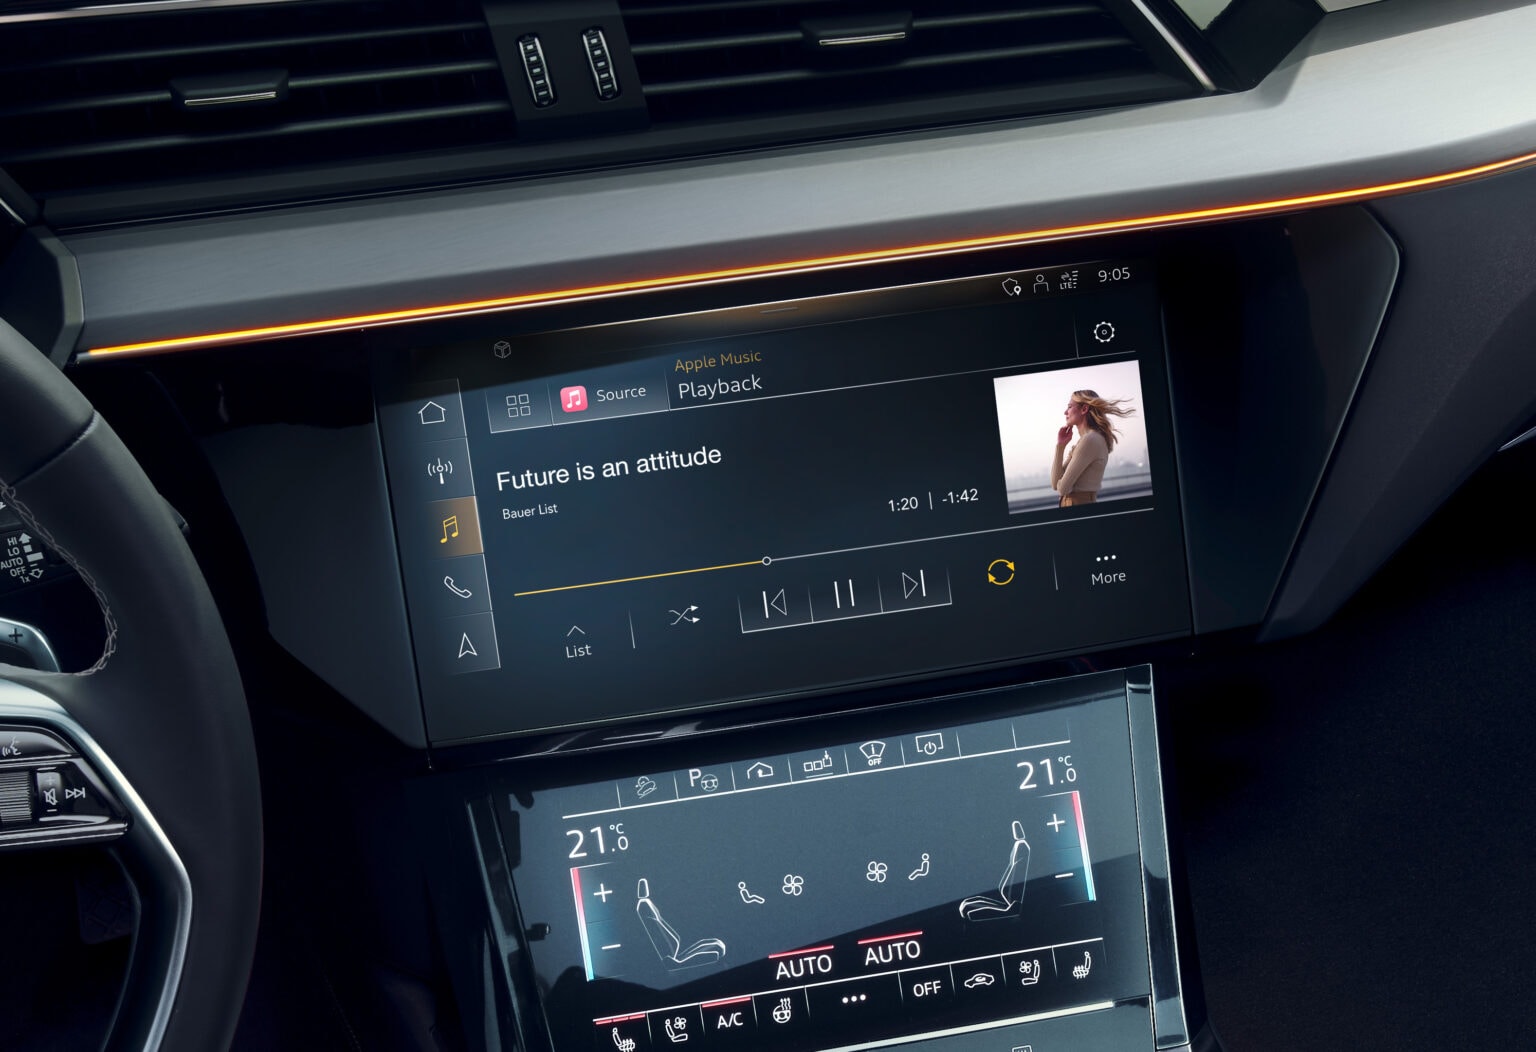 Apple Music comes to Audi vehicles